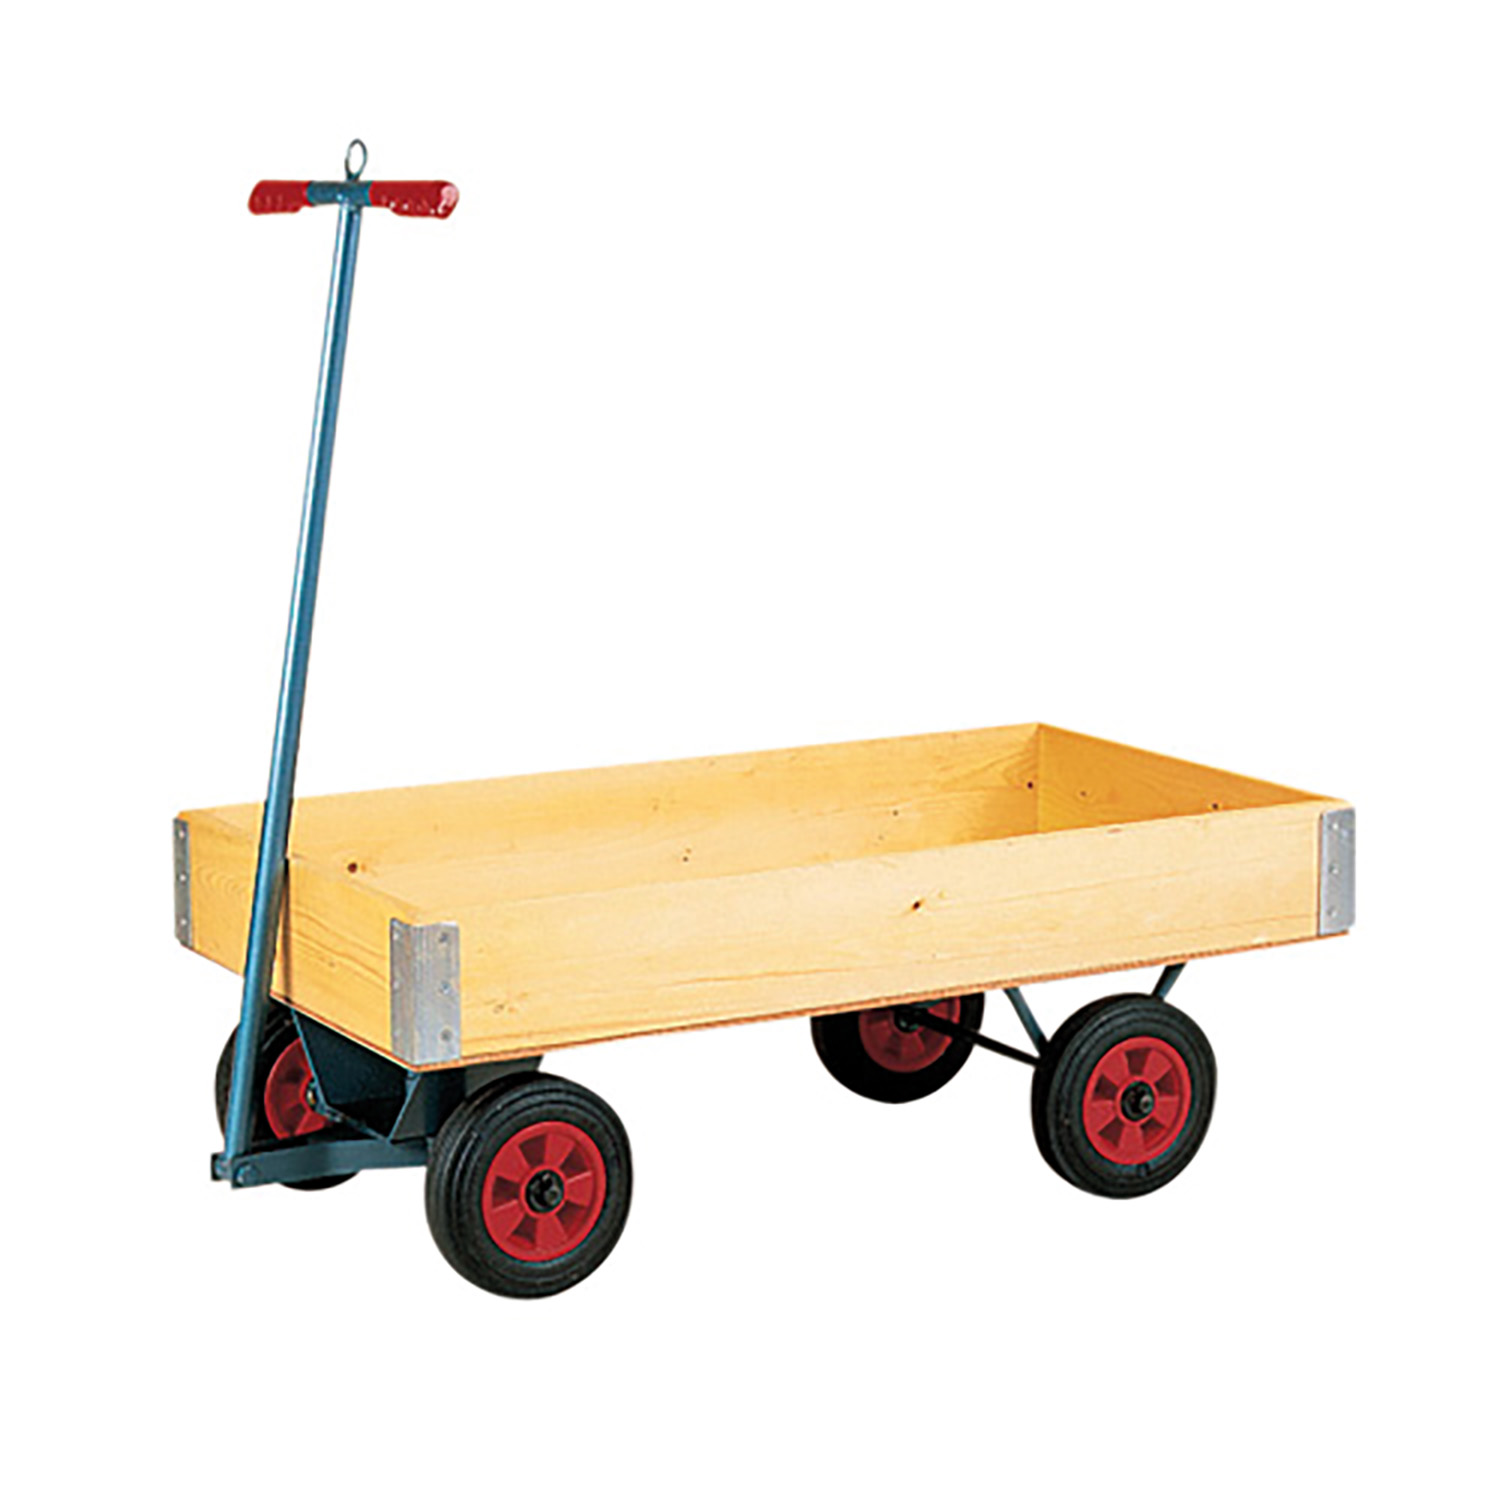 STUBBS TURNTABLE TROLLEY S2882 SMALL SMALL